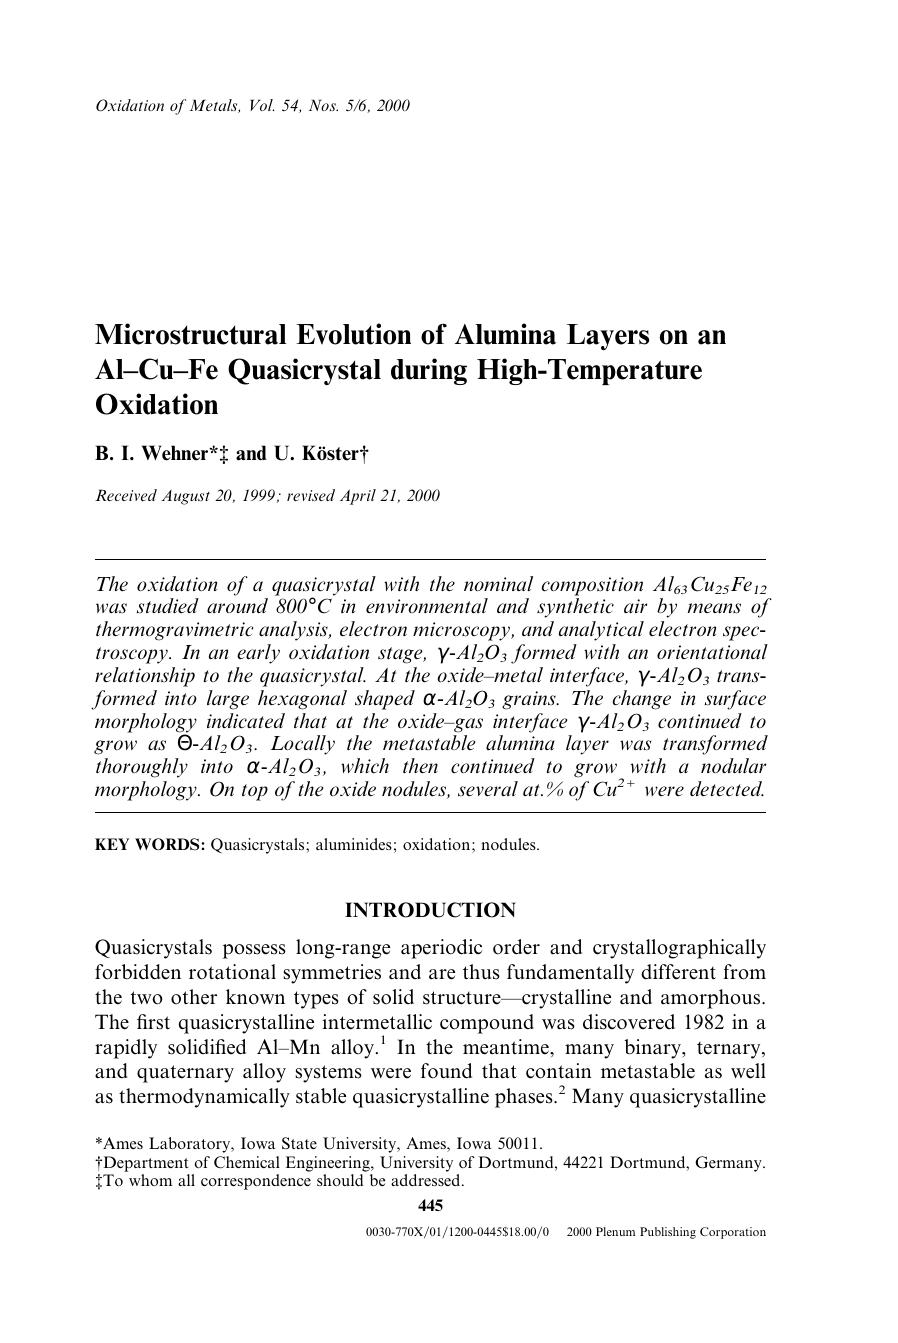 Microstructural Evolution of Alumina Layers on an Al&#x2013;Cu&#x2013;Fe Quasicrystal during High-Temperature Oxidation by Unknown